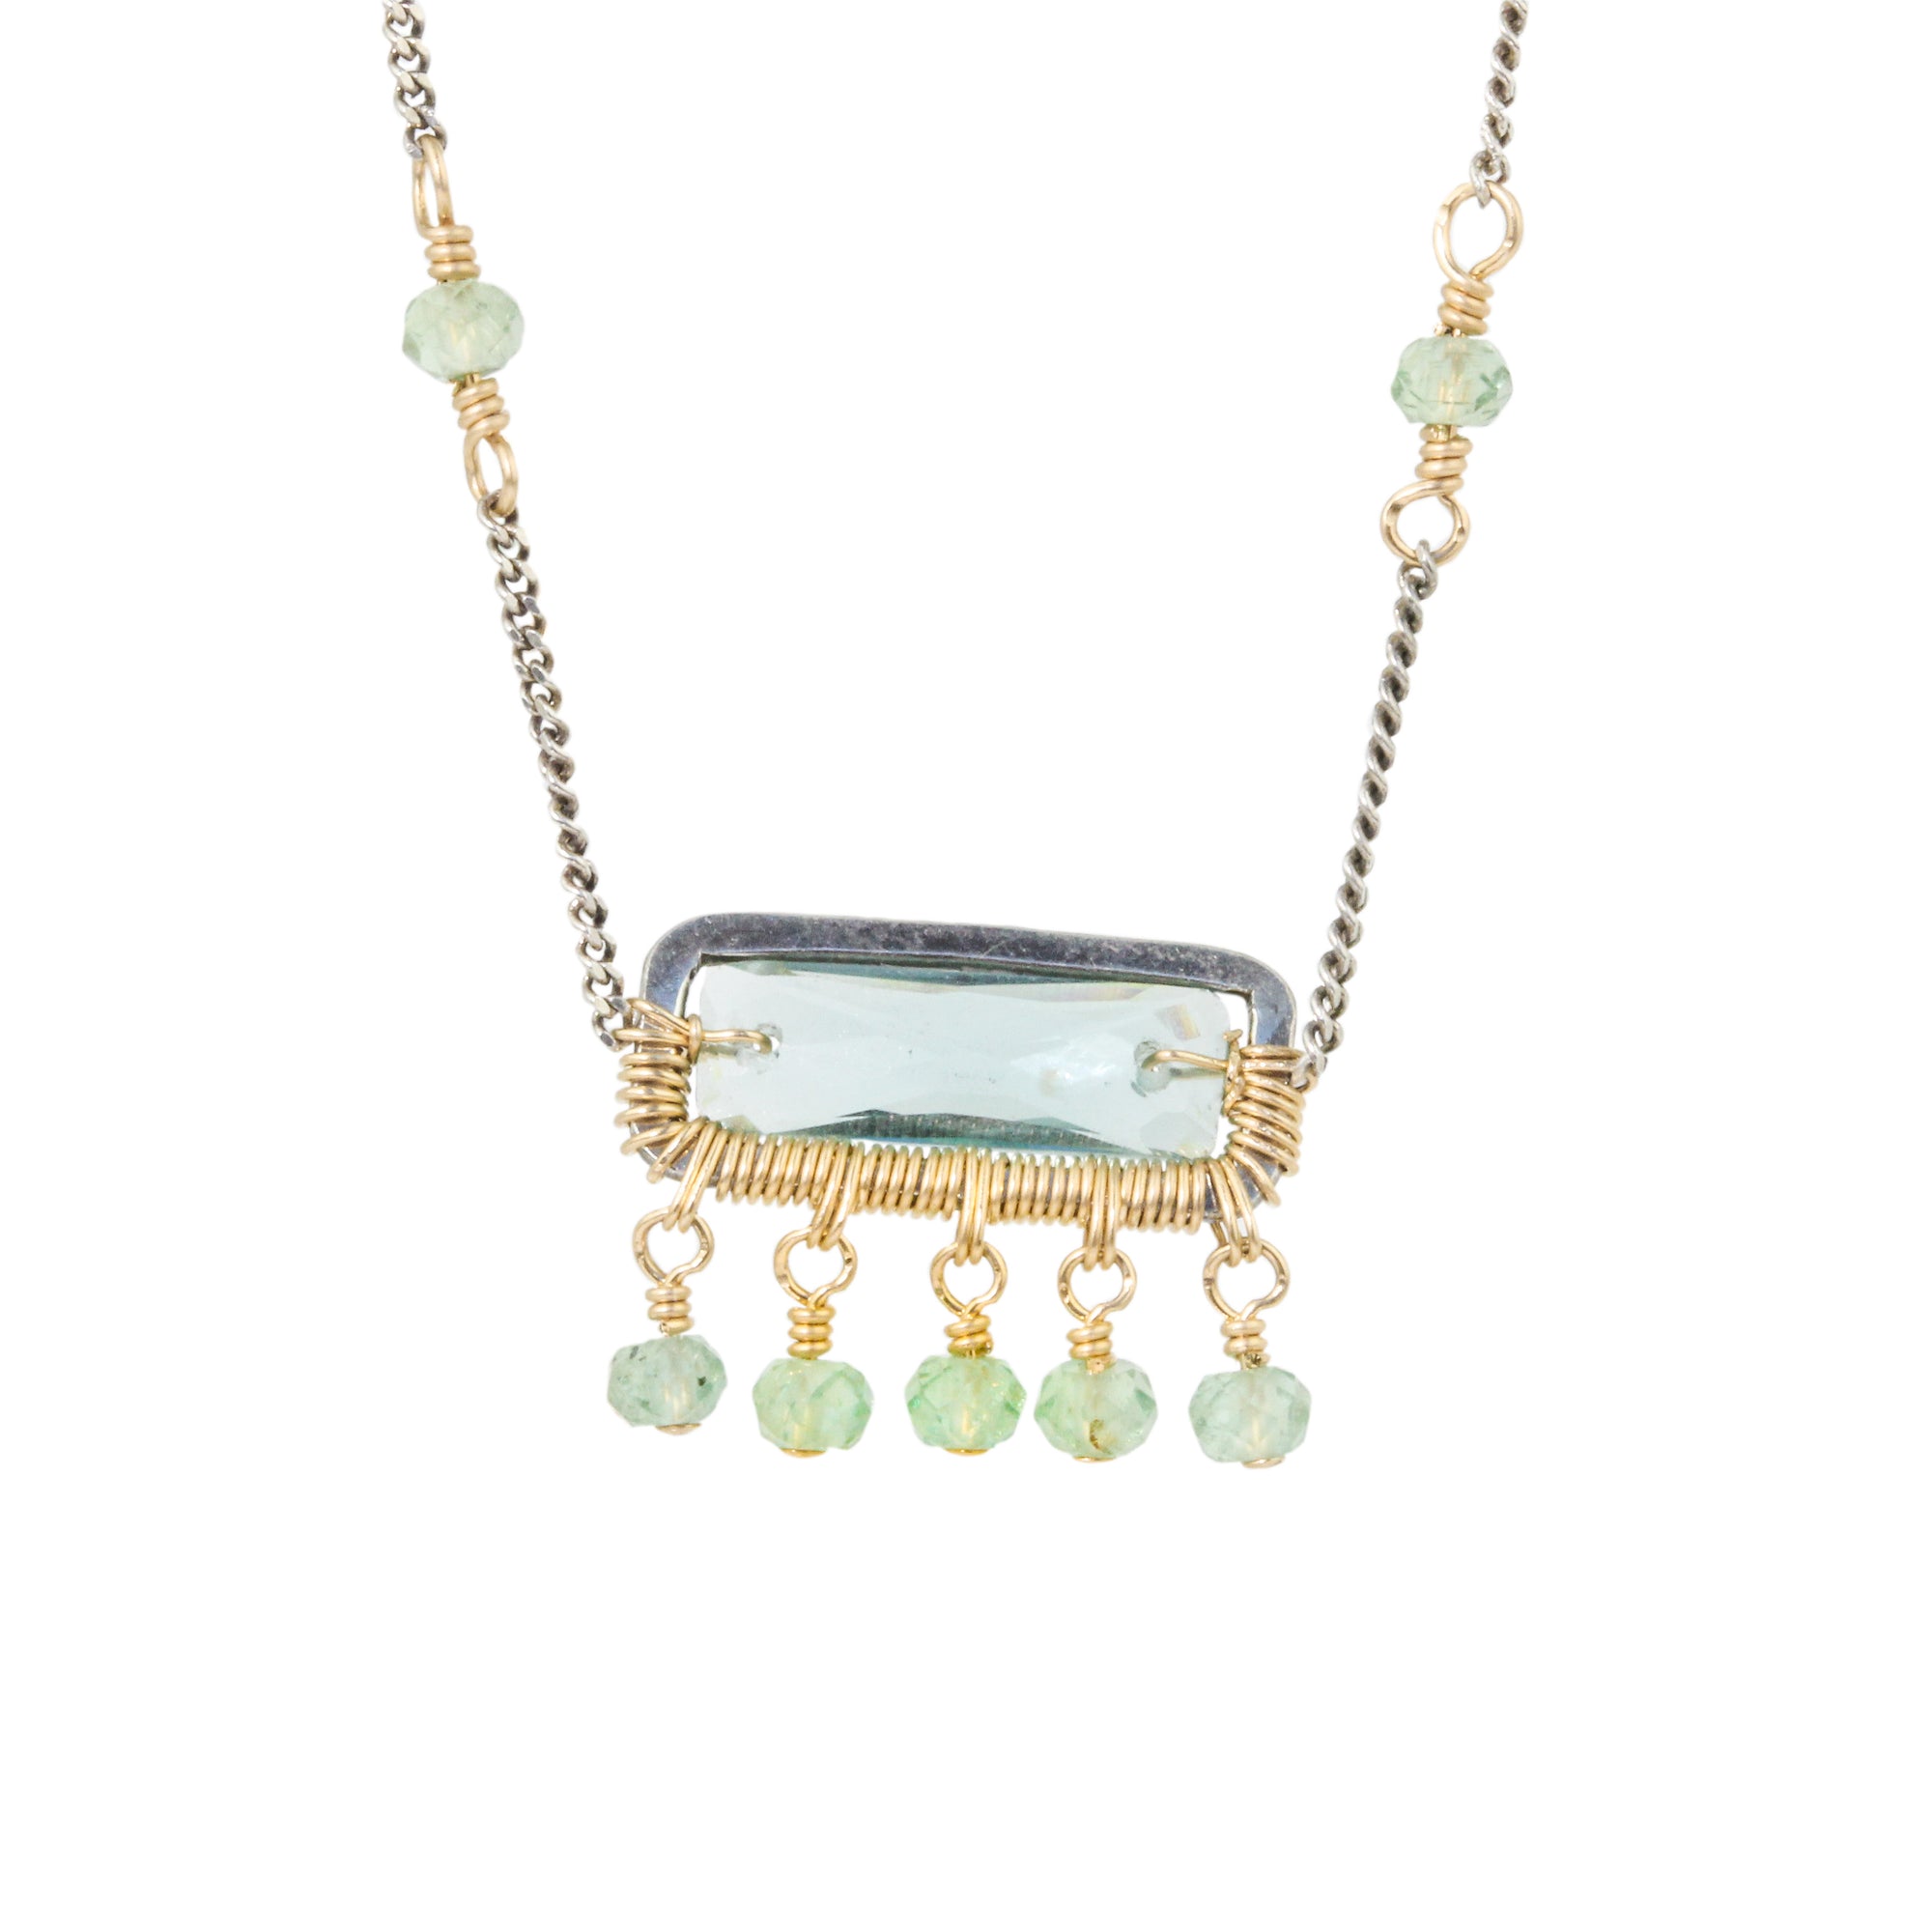 Teal Quartz and Green Apatite Necklace